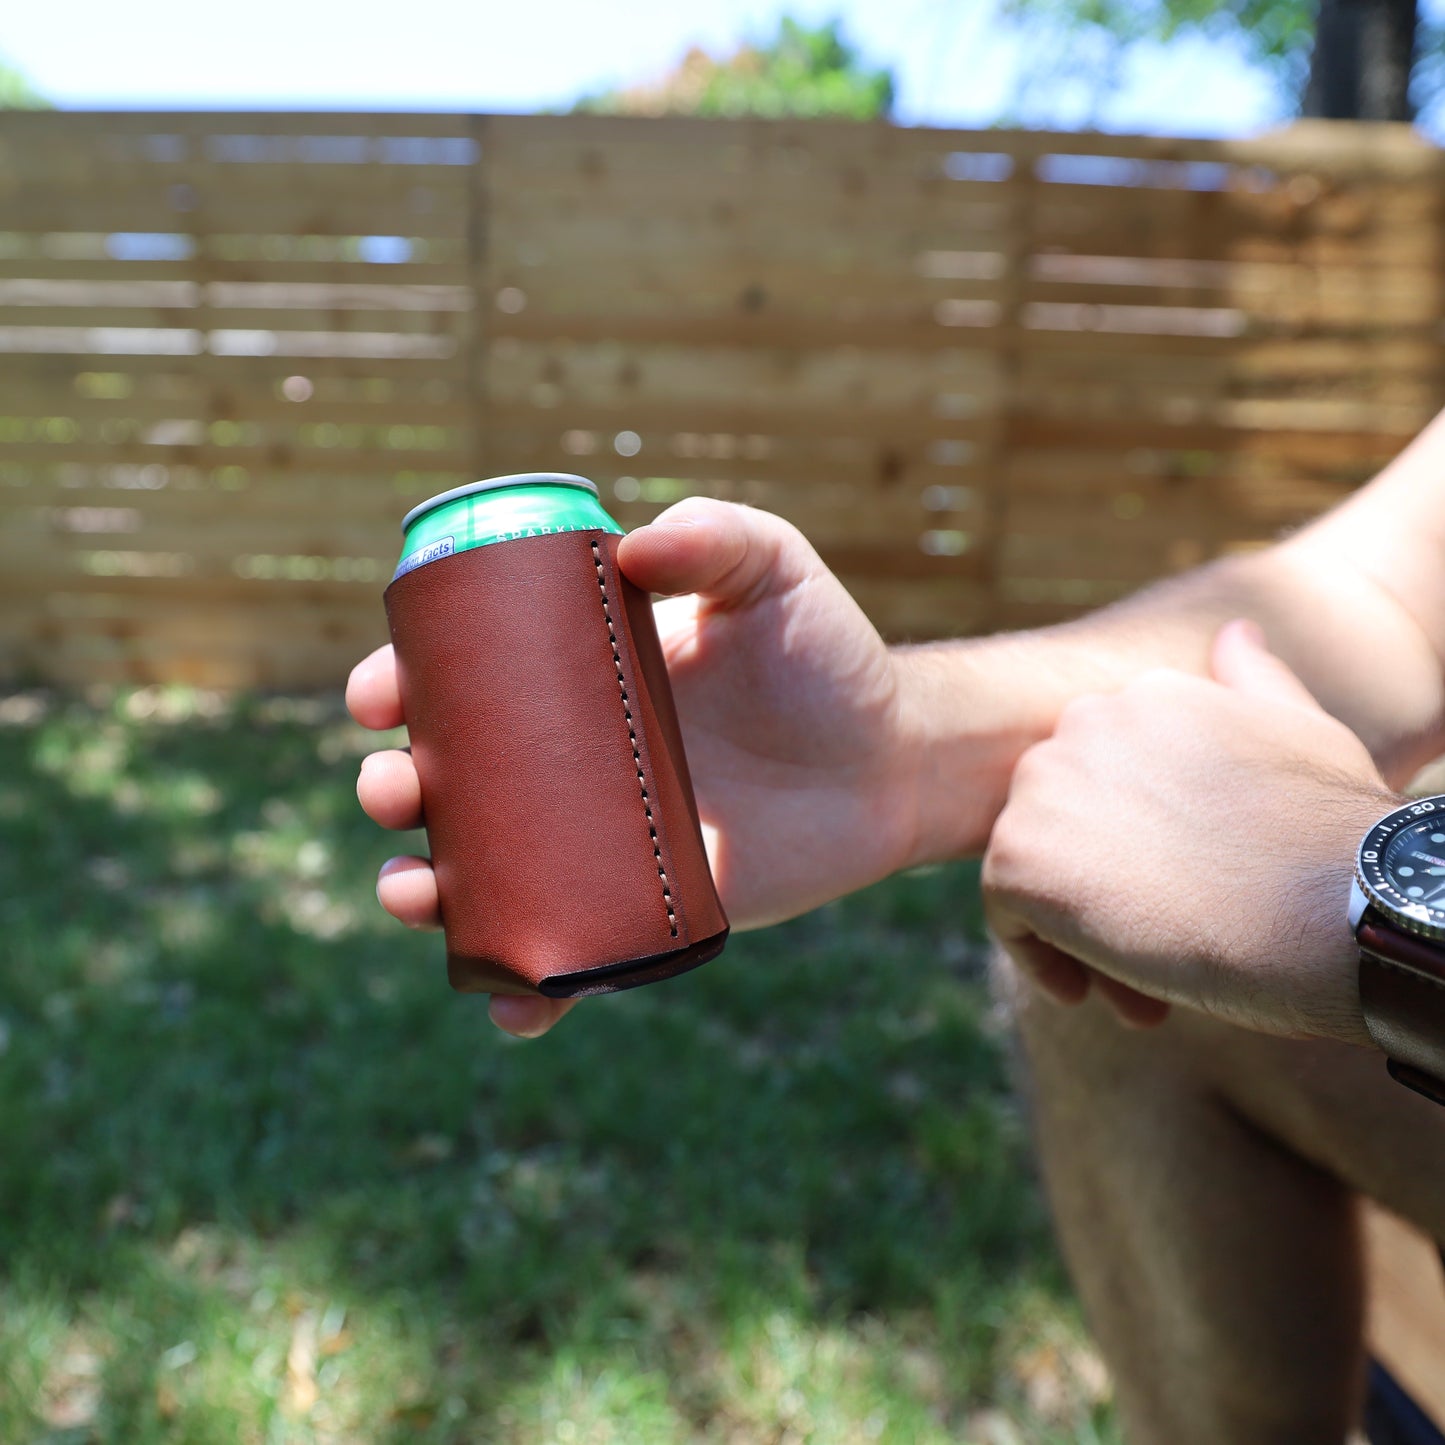 Free Leather Drink Koozie Holder Template Guide – Hide & Supply